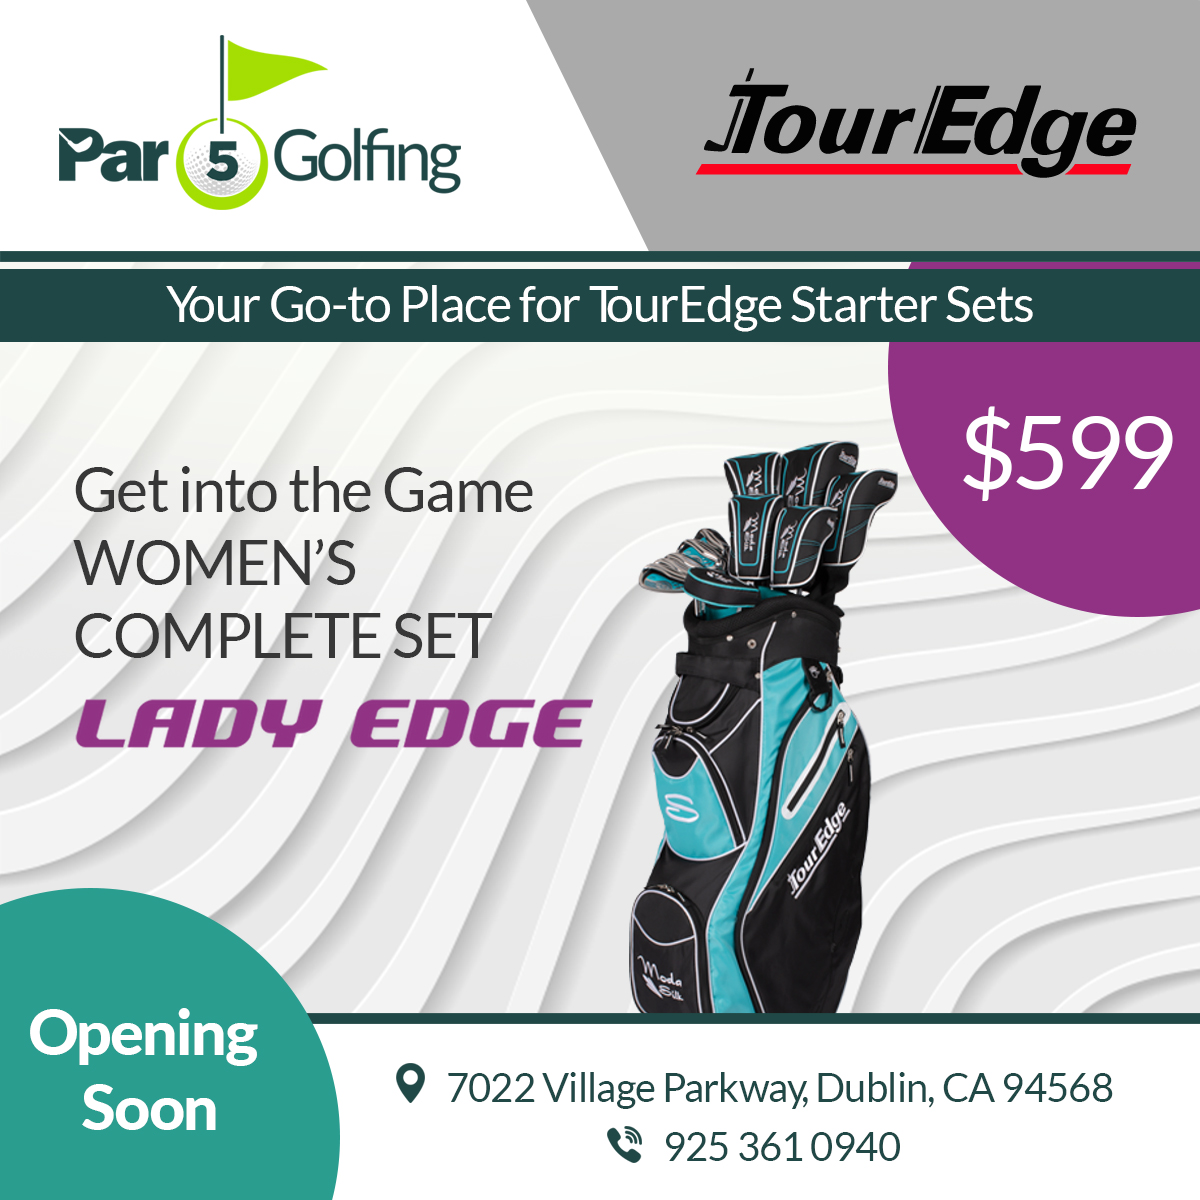 #Par5Golfing is going to be your primary go-to shop for #TourEdge #golfset in Dublin, CA. Opening soon. Stay tuned! 

#golf #golfing #golfevent #golftravel #golfclub #golfpro #golfer #golffun #golftraining #golfstore #PGA #tour #masters